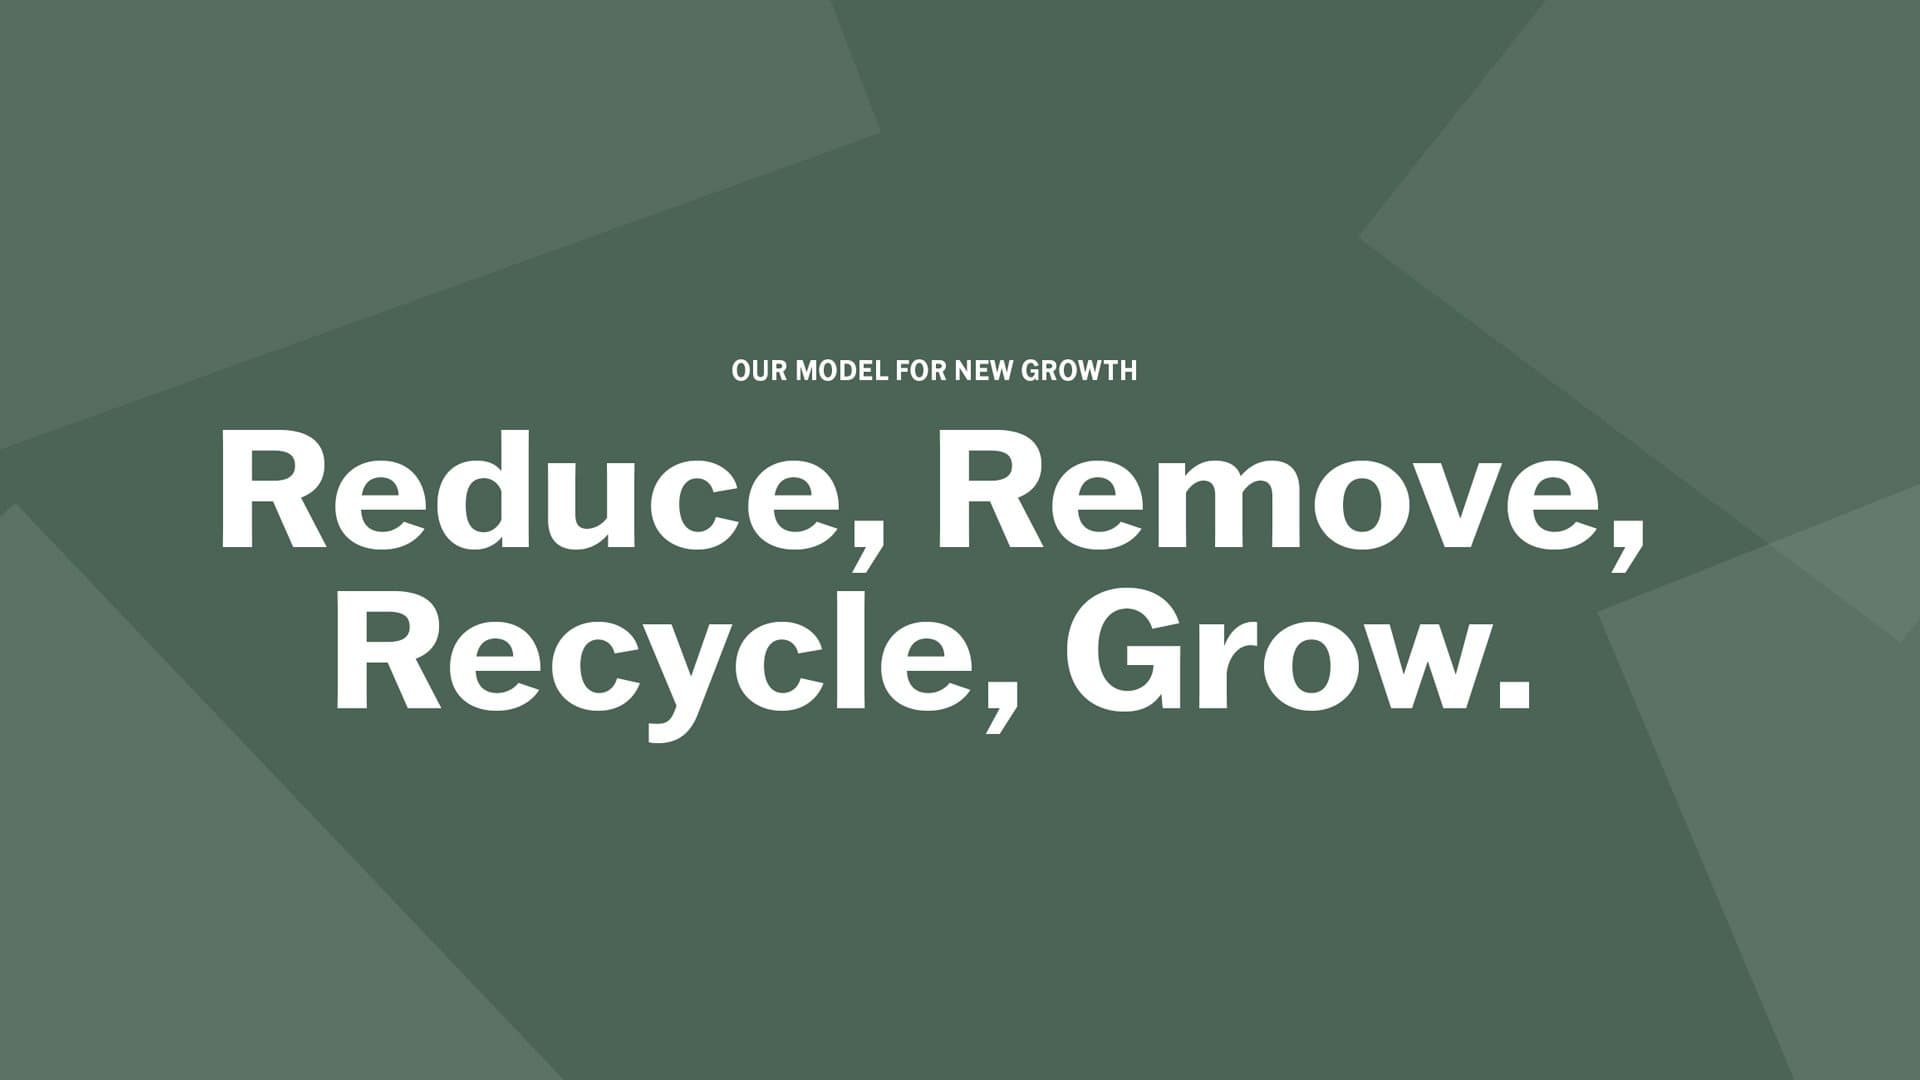 Reduce, Remove, Recycle and Grow – our model for New Growth